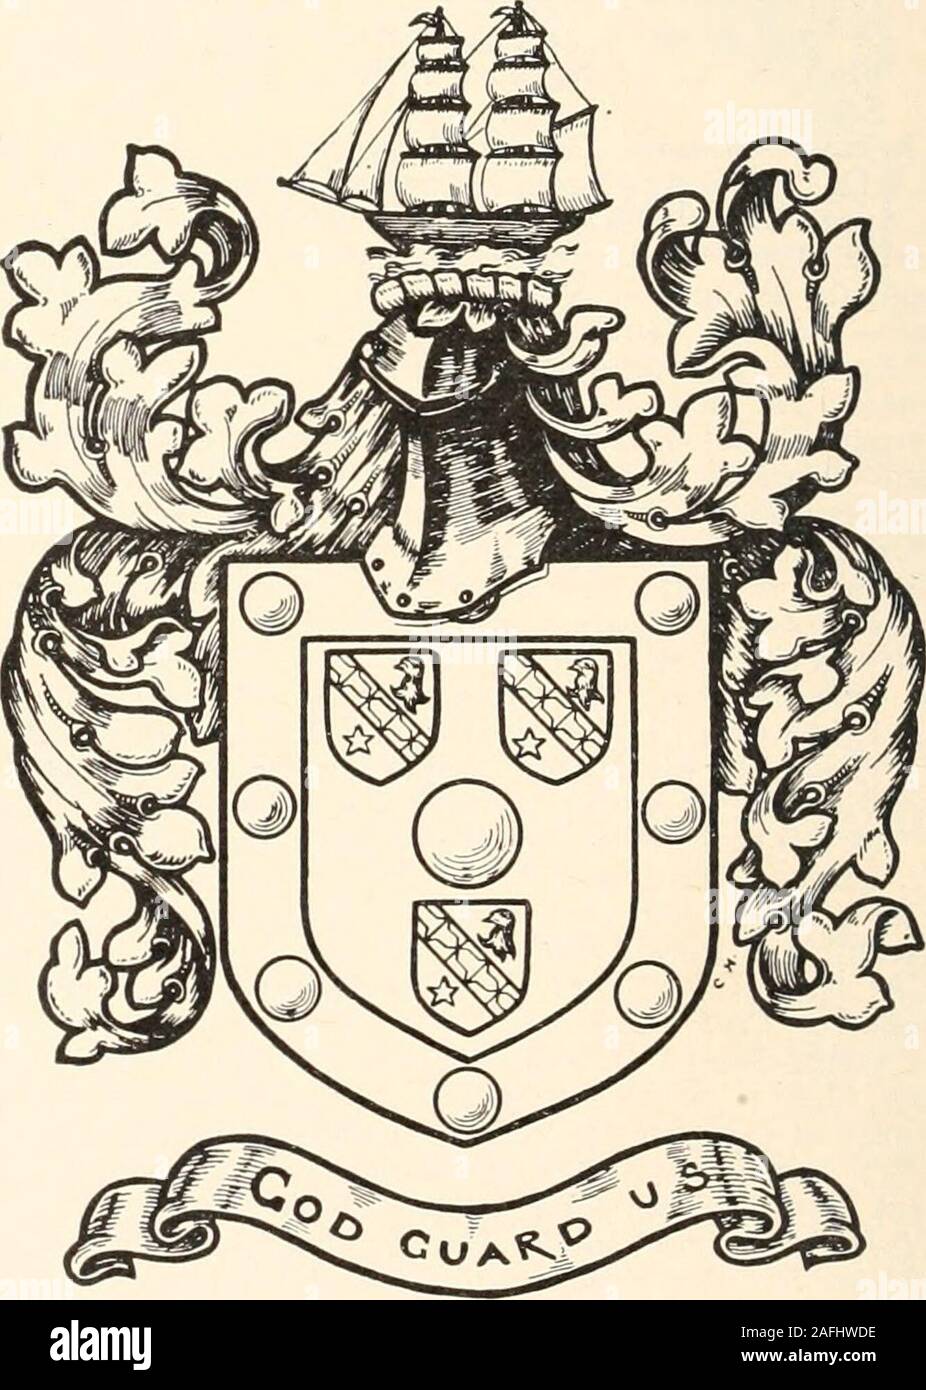 . Armorial families : a directory of gentlemen of coat-armour. on, Gentleman, b. 1923. Res.—ElfordRectory, Tamworth.George Arthur Hardcastle Bridson, Gentleman, b. 1880. BRIERLY. Argent, a cross nebuly gules, in the firstand fourth quarters an oak-tree eradicated proper, a chiefarched vert. Mantling gules and argent. Crest—On awreath of the colours, in front of an oak-tree proper, anescutcheon argent, gutt6e-de-sang, charged with a crossnebuly gules, between two roses of the last, both stalkedand leaved of the first. Motto— Ad utrumque paratus. Son of John Swallow Brierly, Gentleman, b. 1842 ; Stock Photo